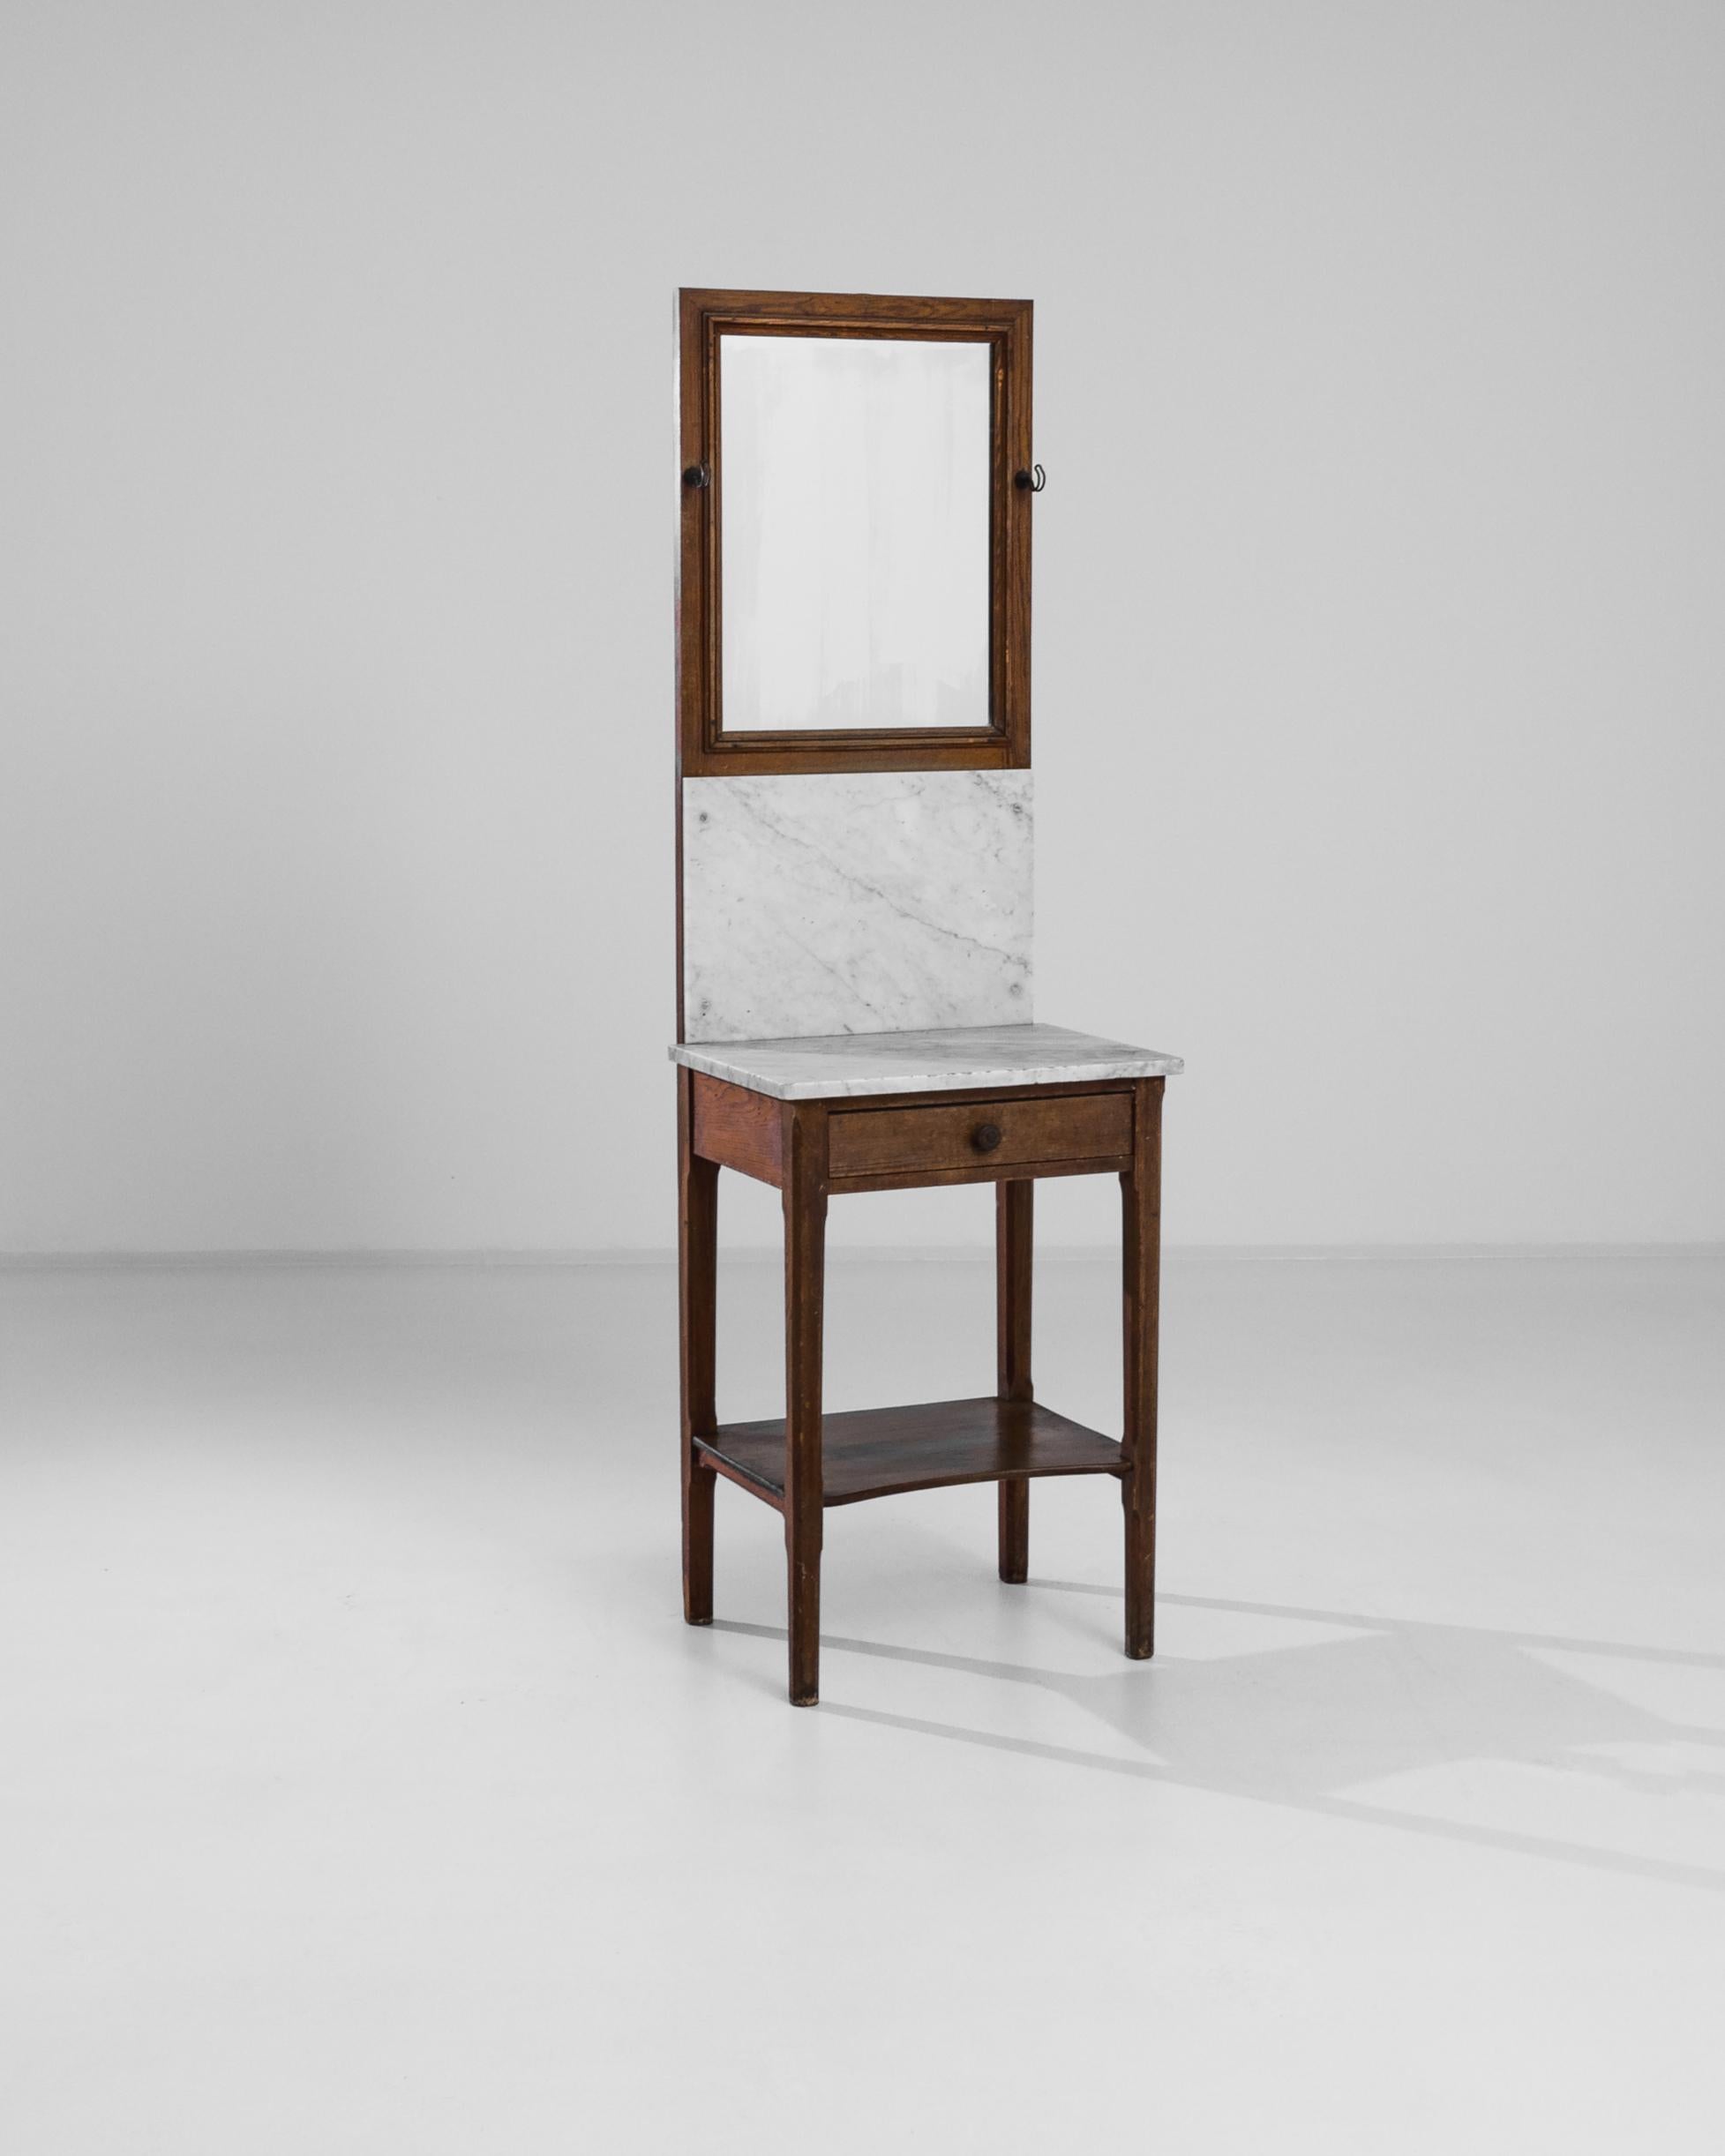 This curious tall dressing table was handcrafted in Belgium circa 1910. The combination of the dark wooden base with the white marble top imparts a luxurious feel punctuated by the silhouette of the slender legs. The mirror with two practical hooks